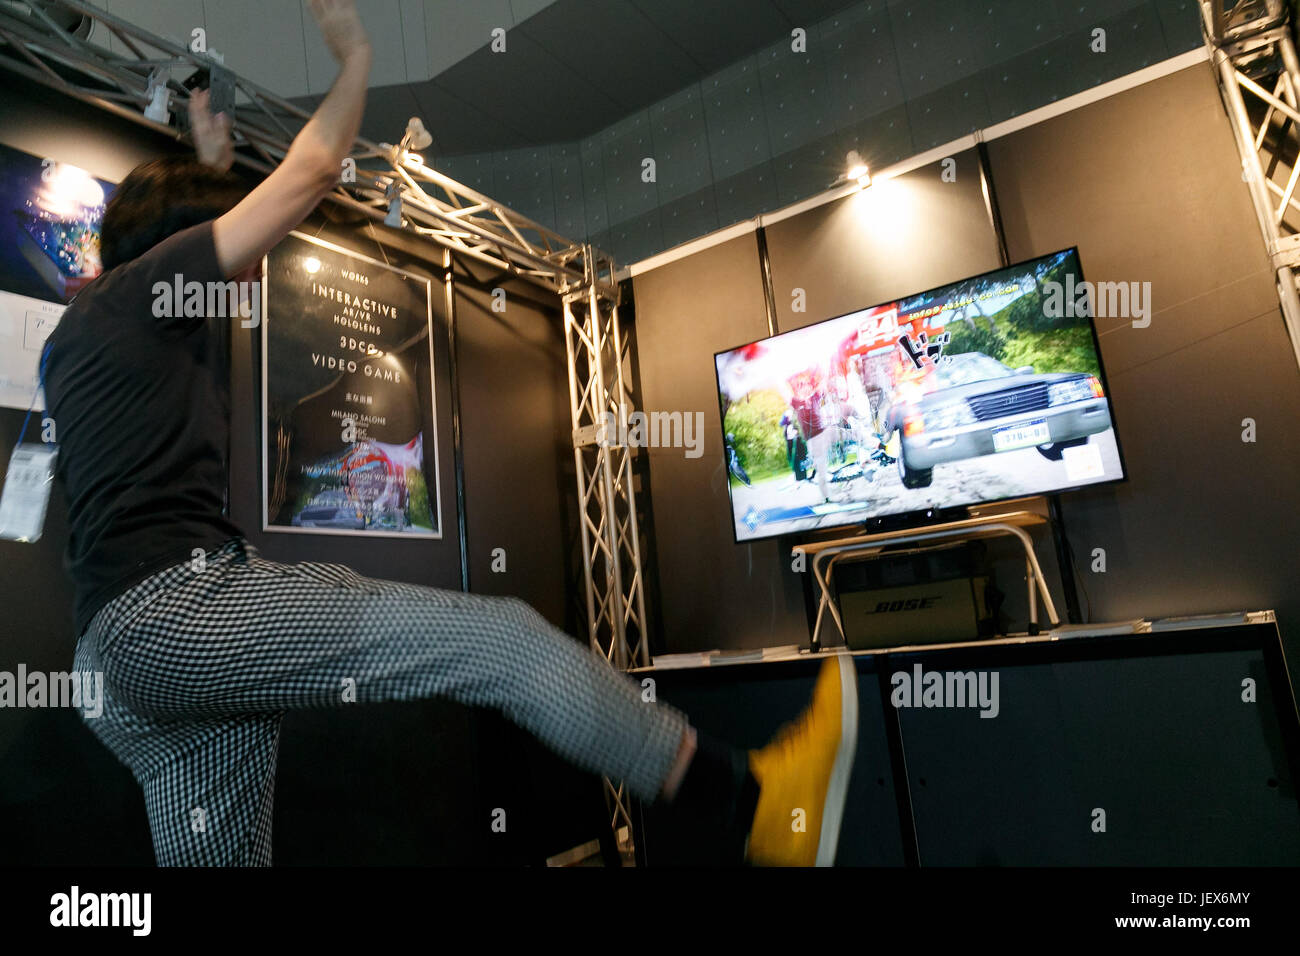 Tokyo, Japan. 28th June, 2017. A man tests a video game during the CONTENT TOKYO 2017 at Tokyo Big Sight on June 28, 2017, Tokyo, Japan. New technologies such as Artificial Intelligence (AI), Virtual Reality (VR) and Augmented Reality (AR) are introduced during the three-day trade show where 1760 exhibitors from the entertainment content industry will attend. Organizers expect that the event will draw some 63,000 visitors. Credit: Rodrigo Reyes Marin/AFLO/Alamy Live News Stock Photo